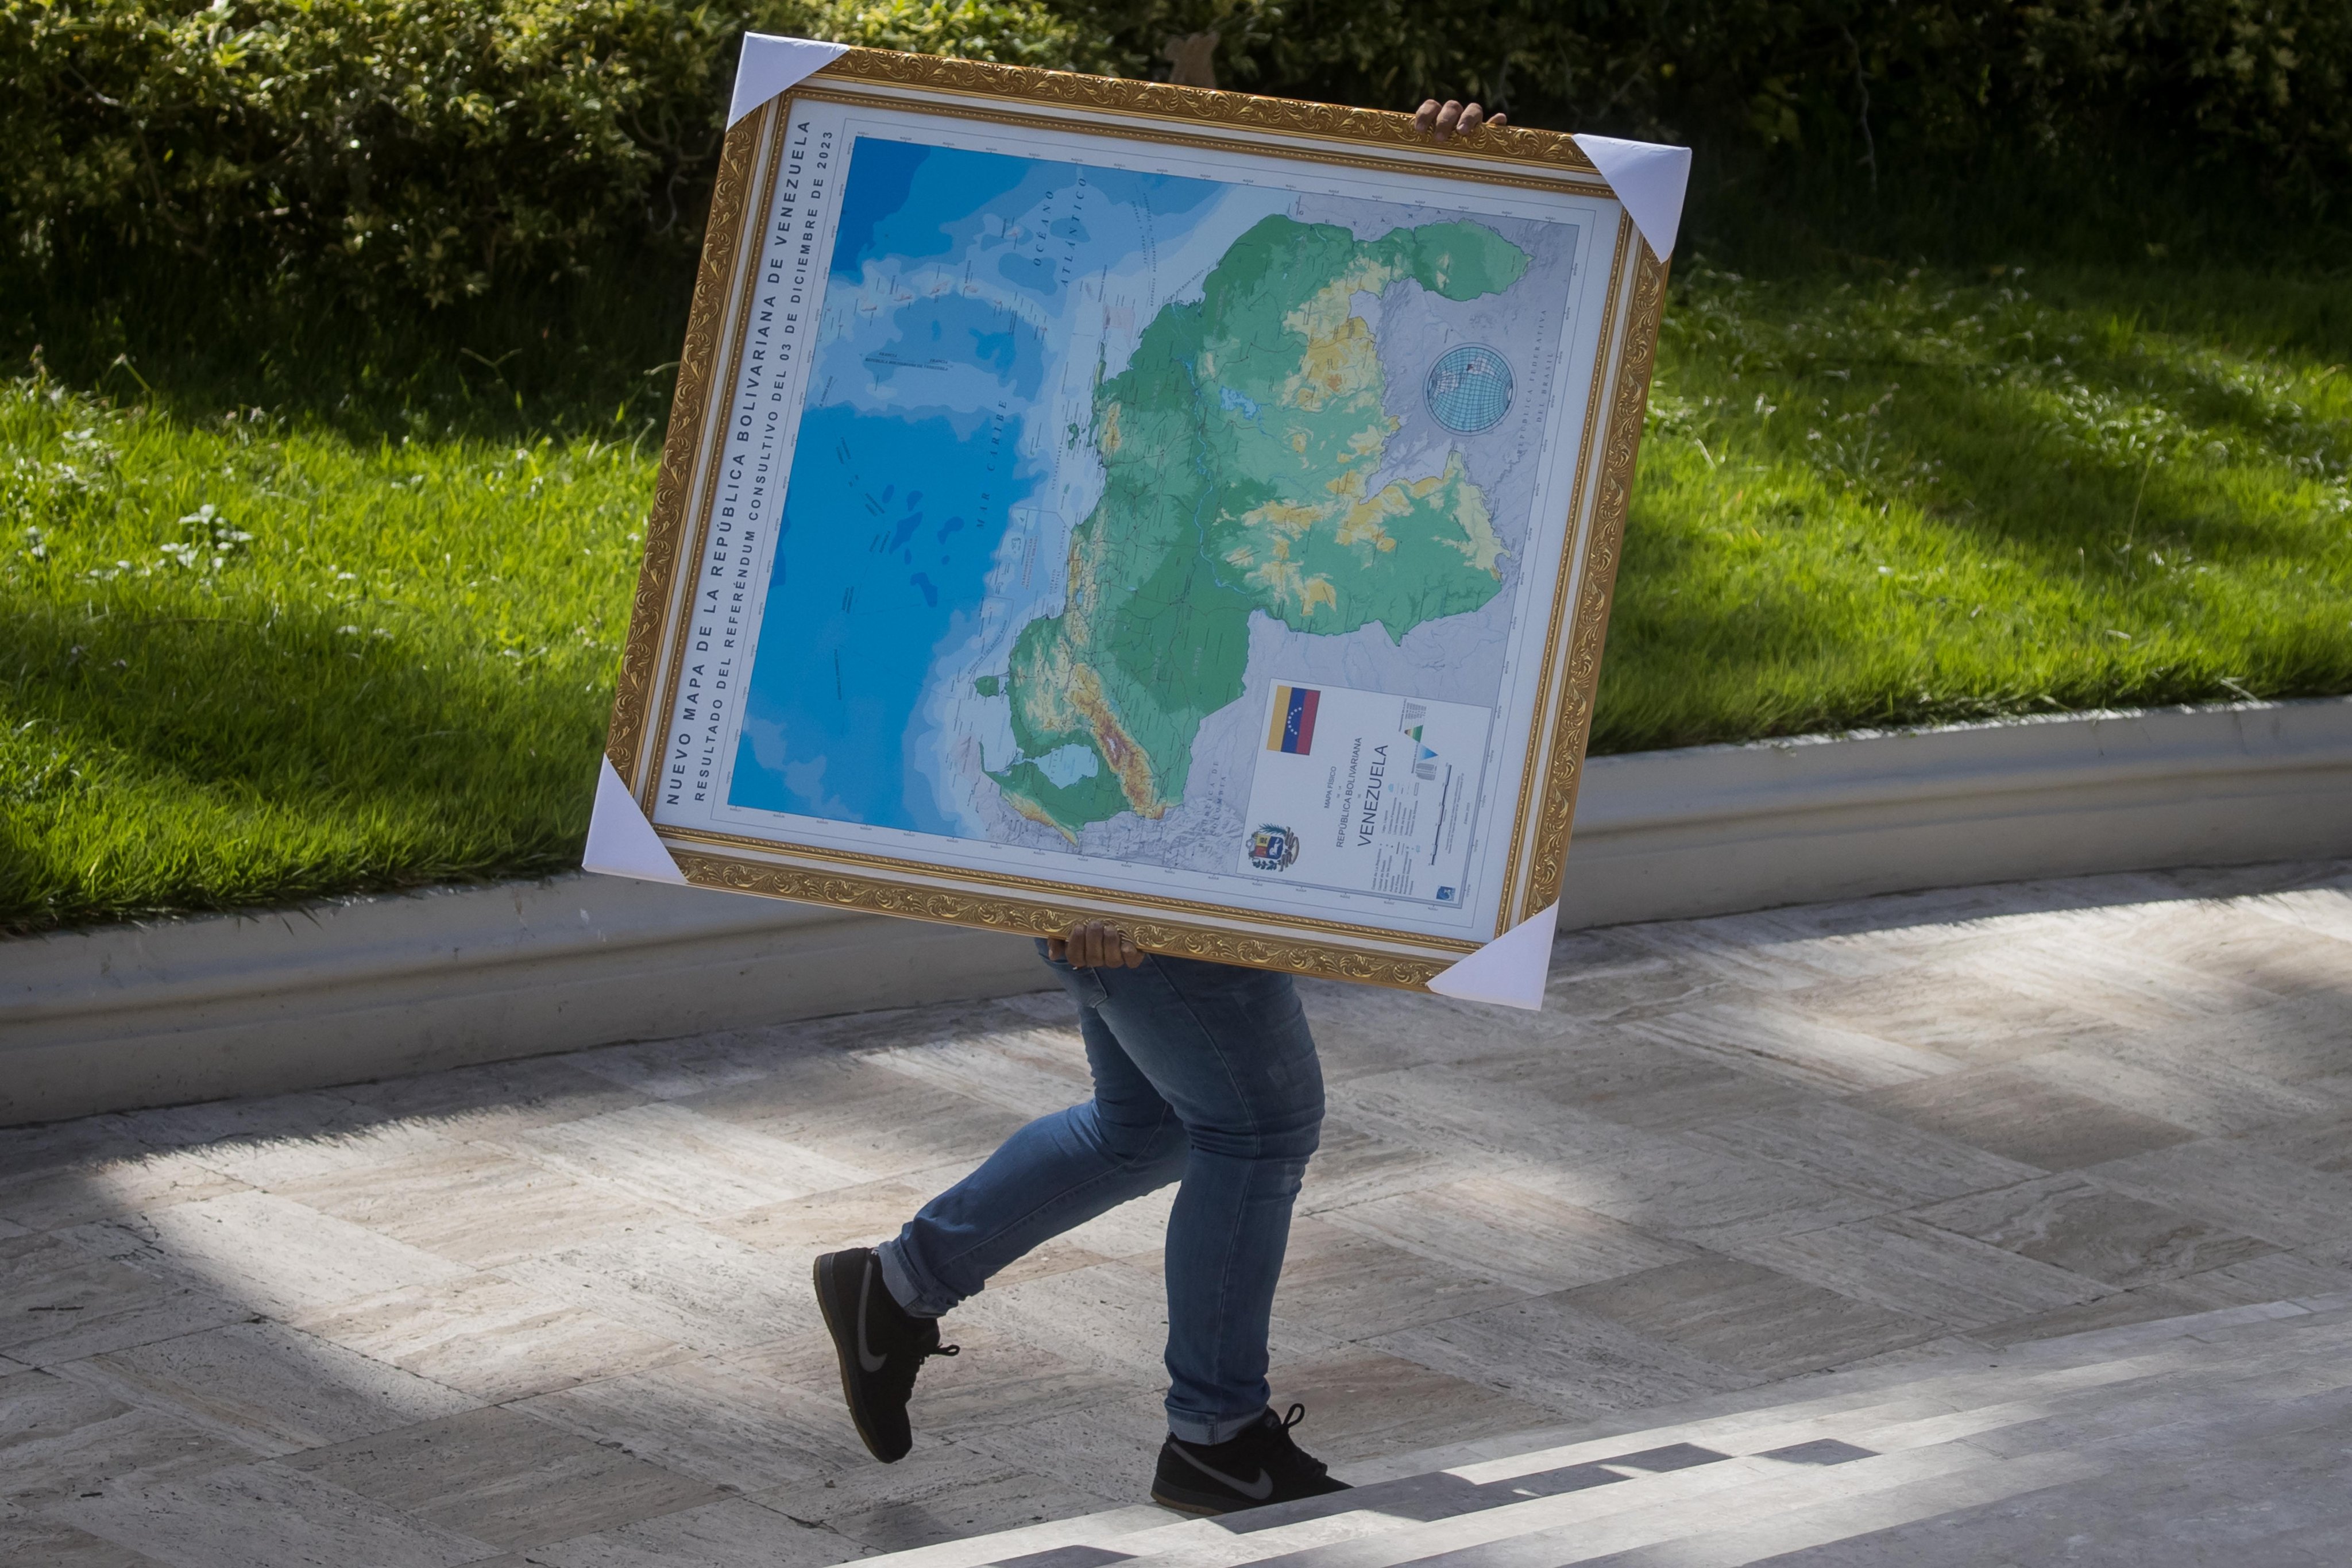 A man in Caracas carries a framed map of Venezuela, showing the disputed Essequibo region as part of Venezuela. Photo: EPA-EFE